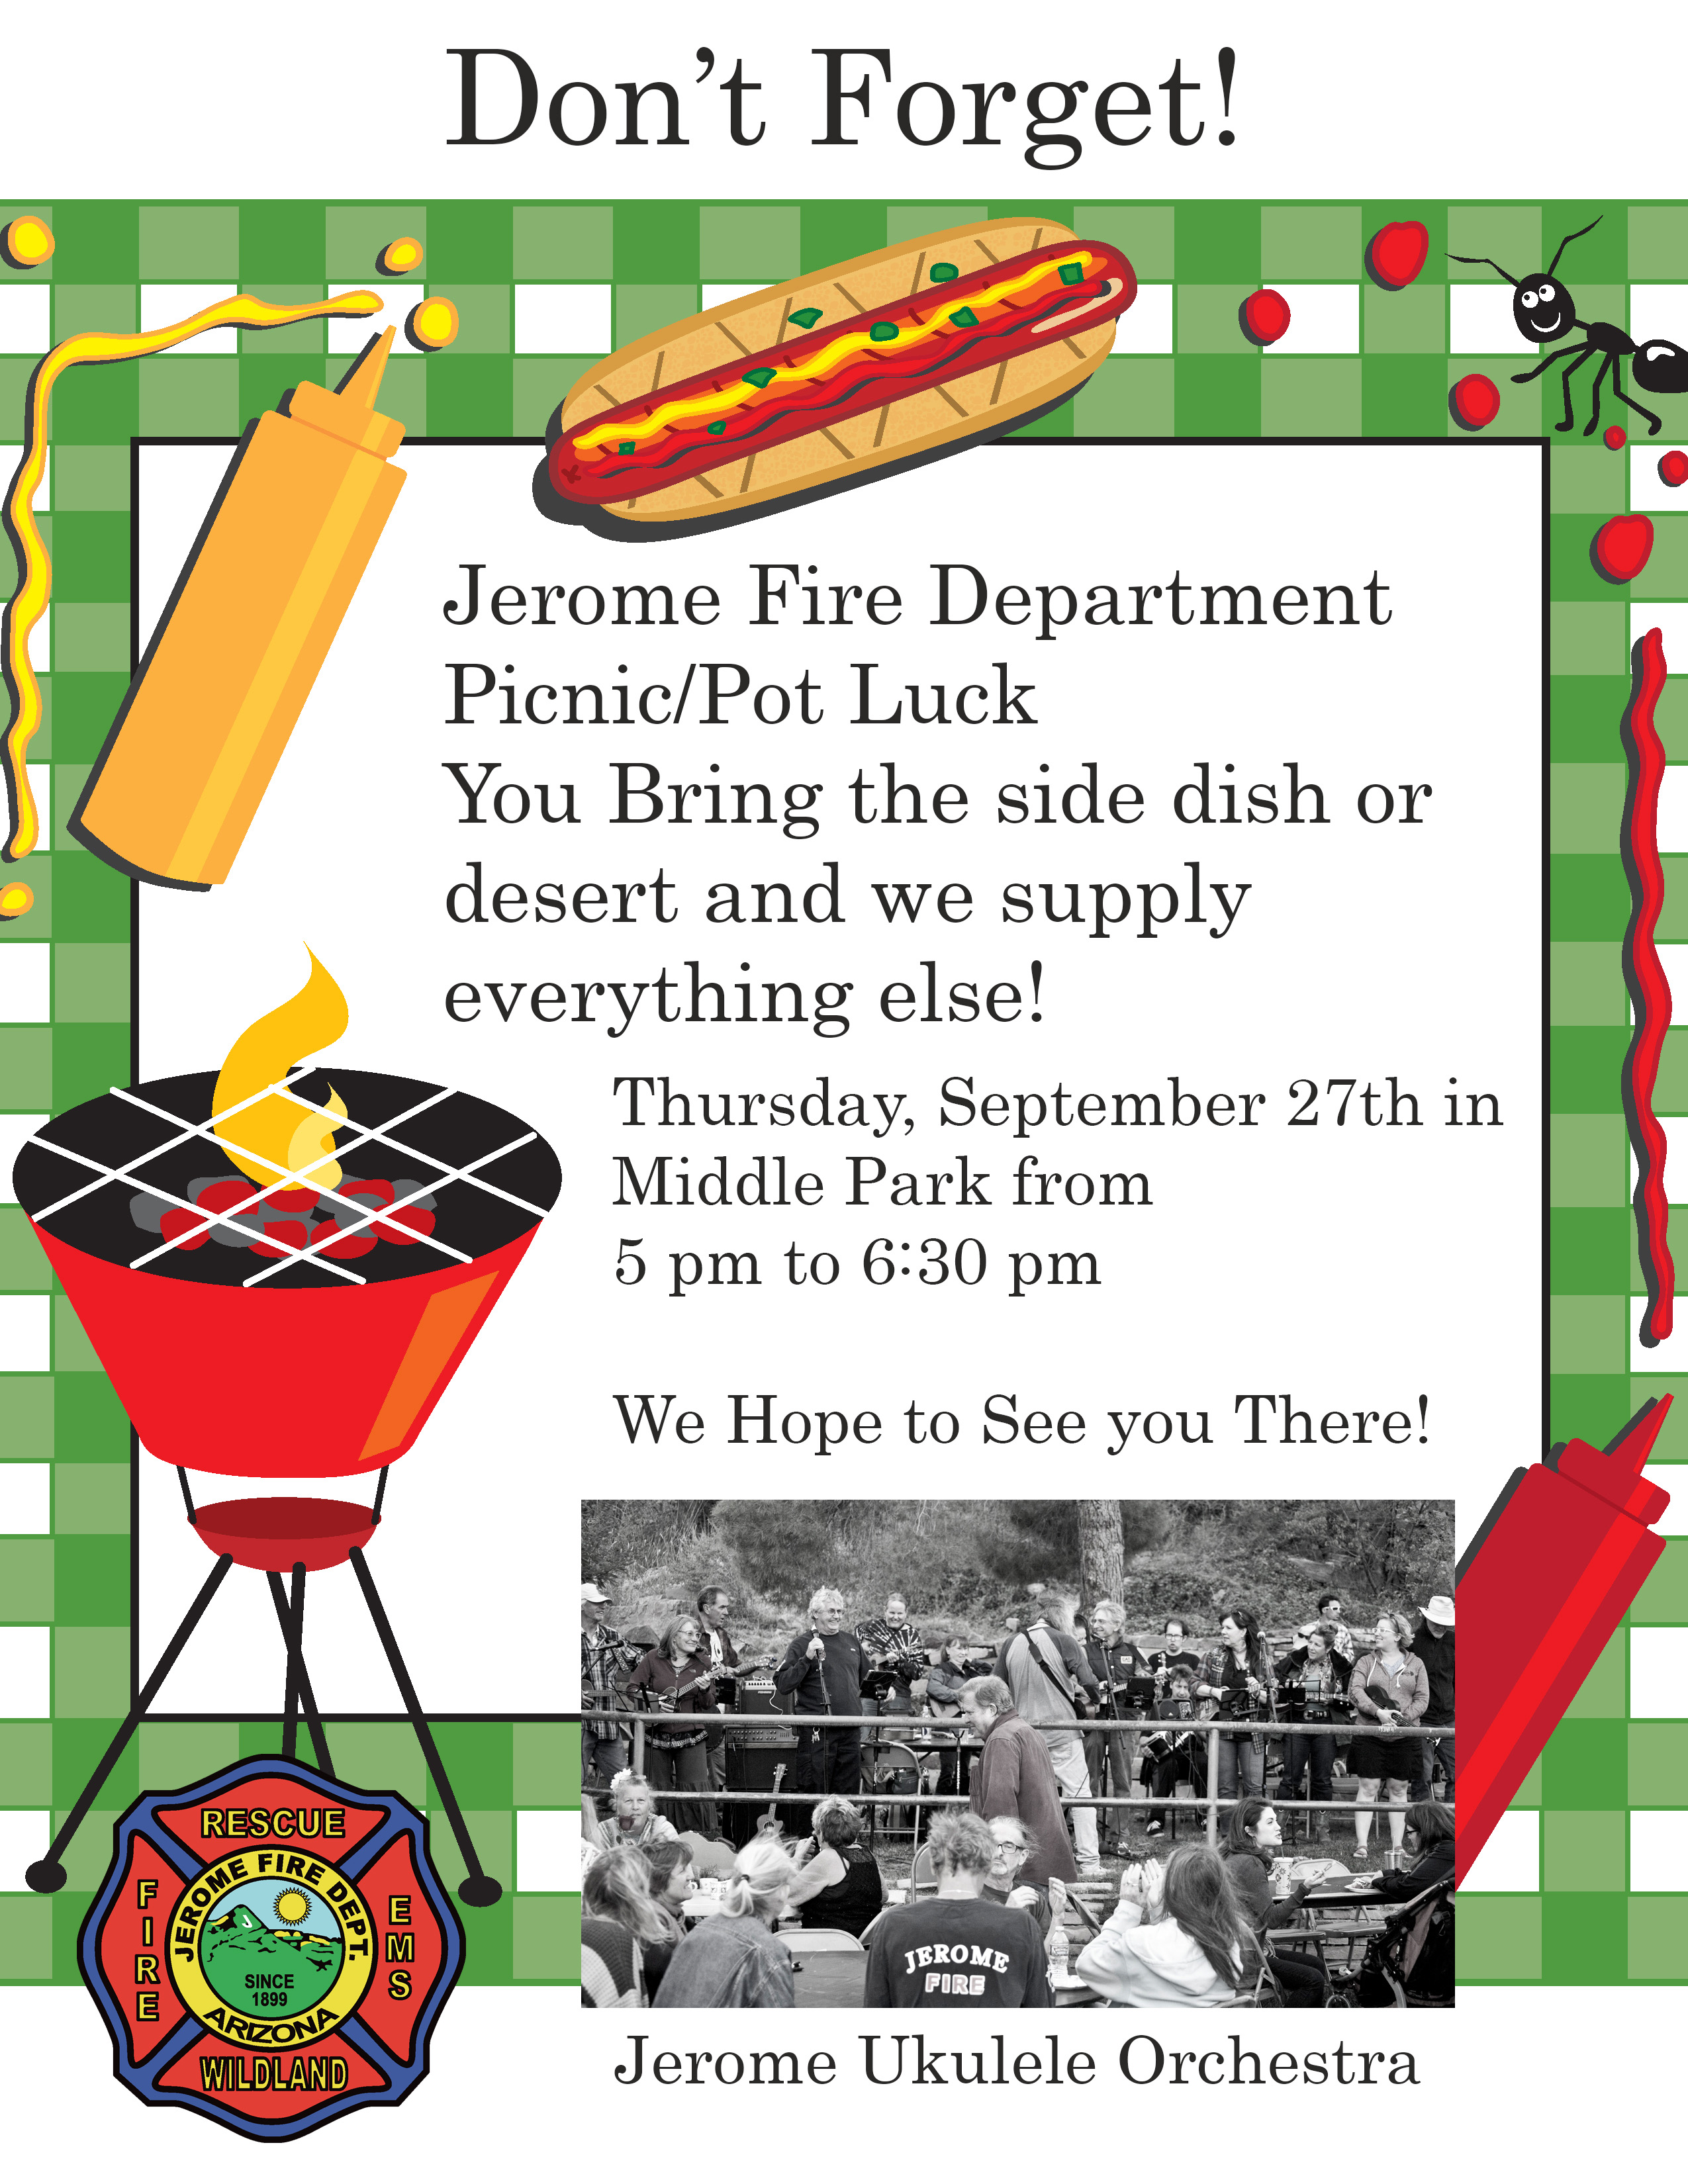 Jerome Fire Department town picnic poster